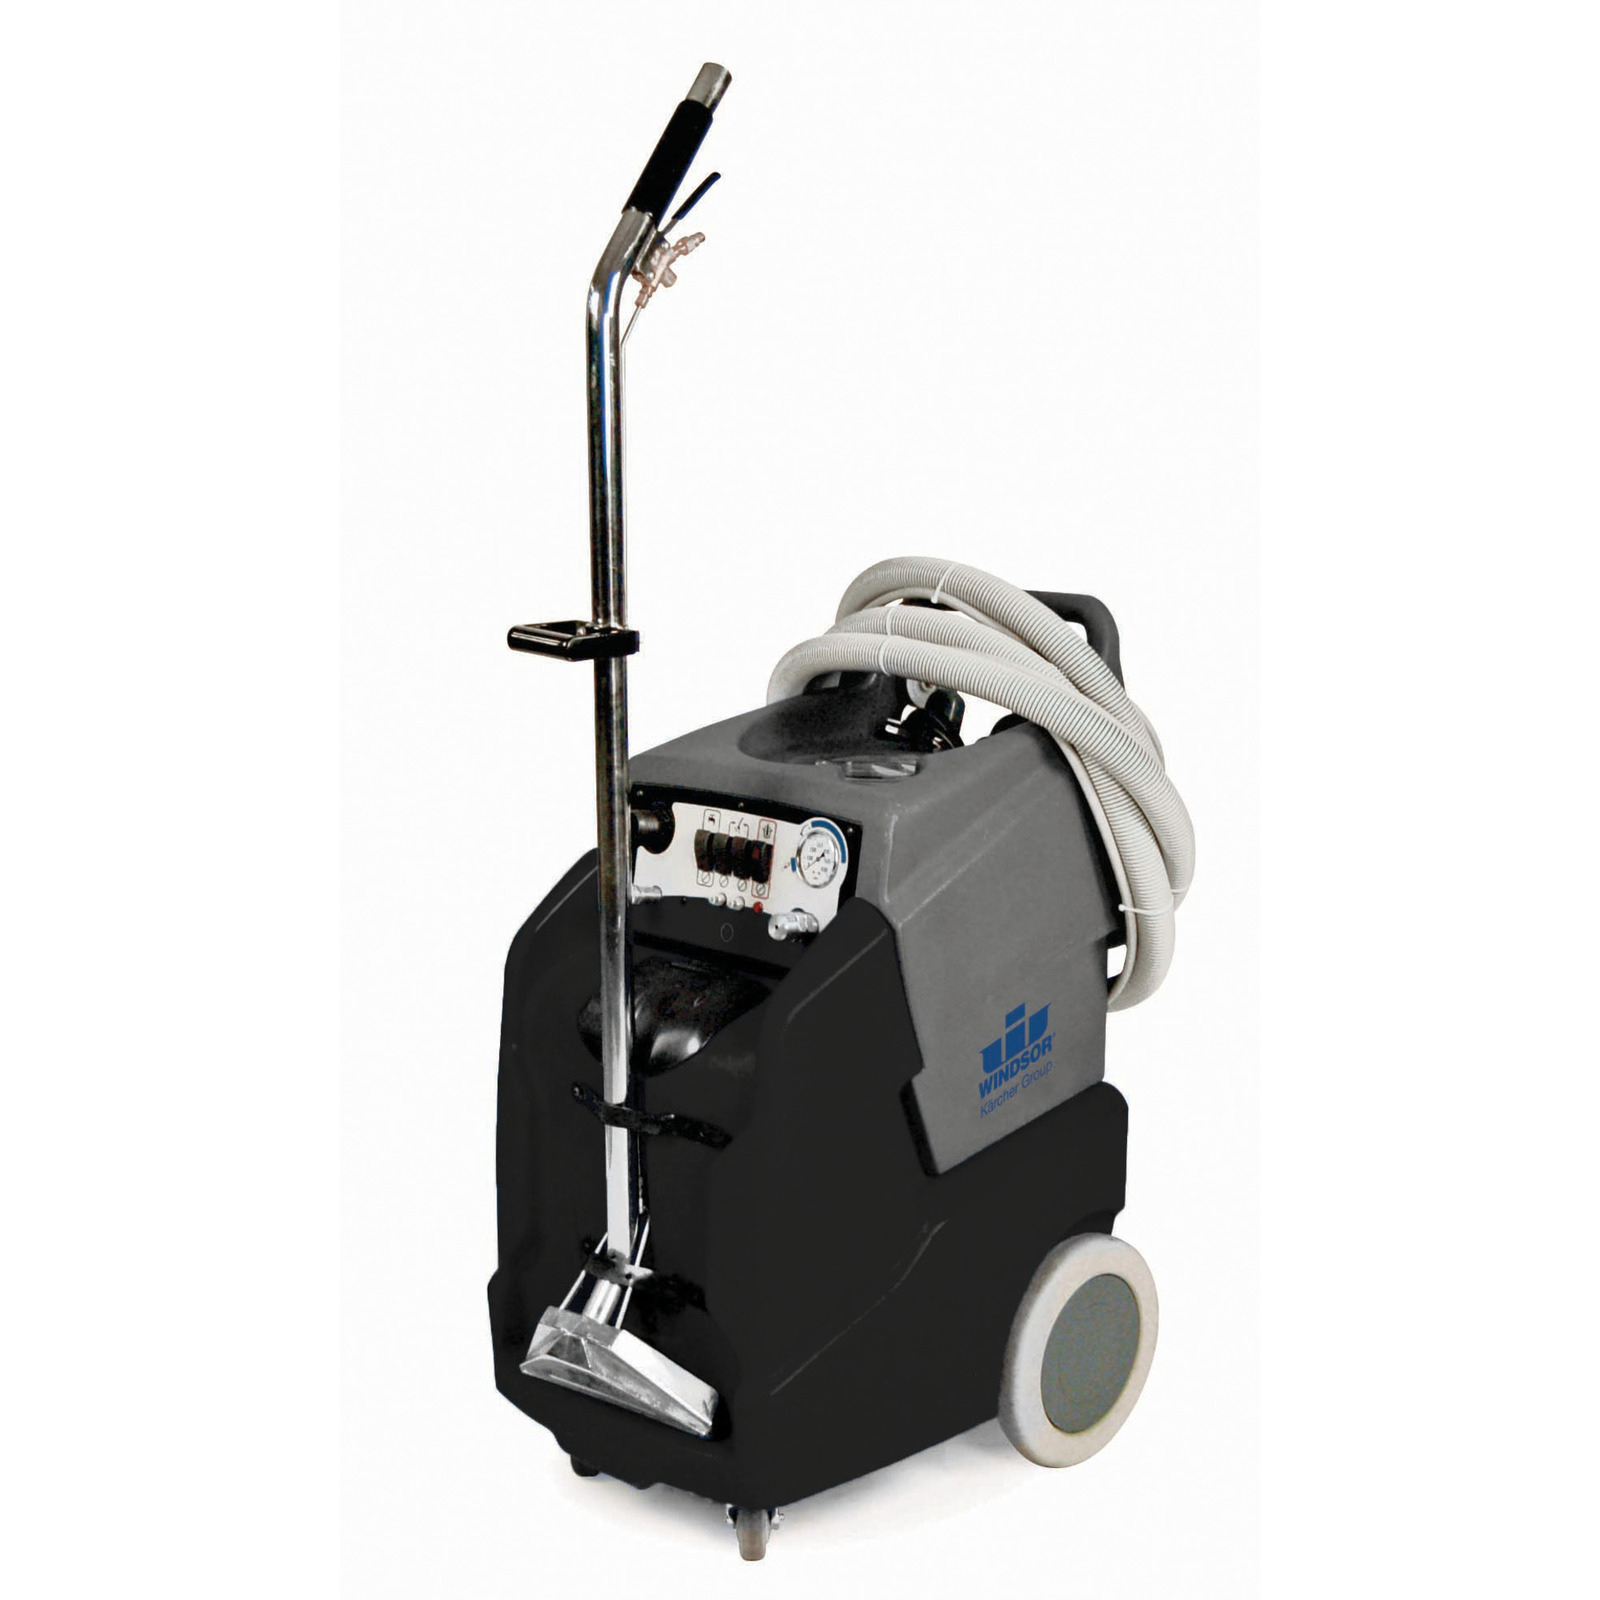 Dominator 13 Commercial Portable Carpet Extractor, 13 gal. | Windsor